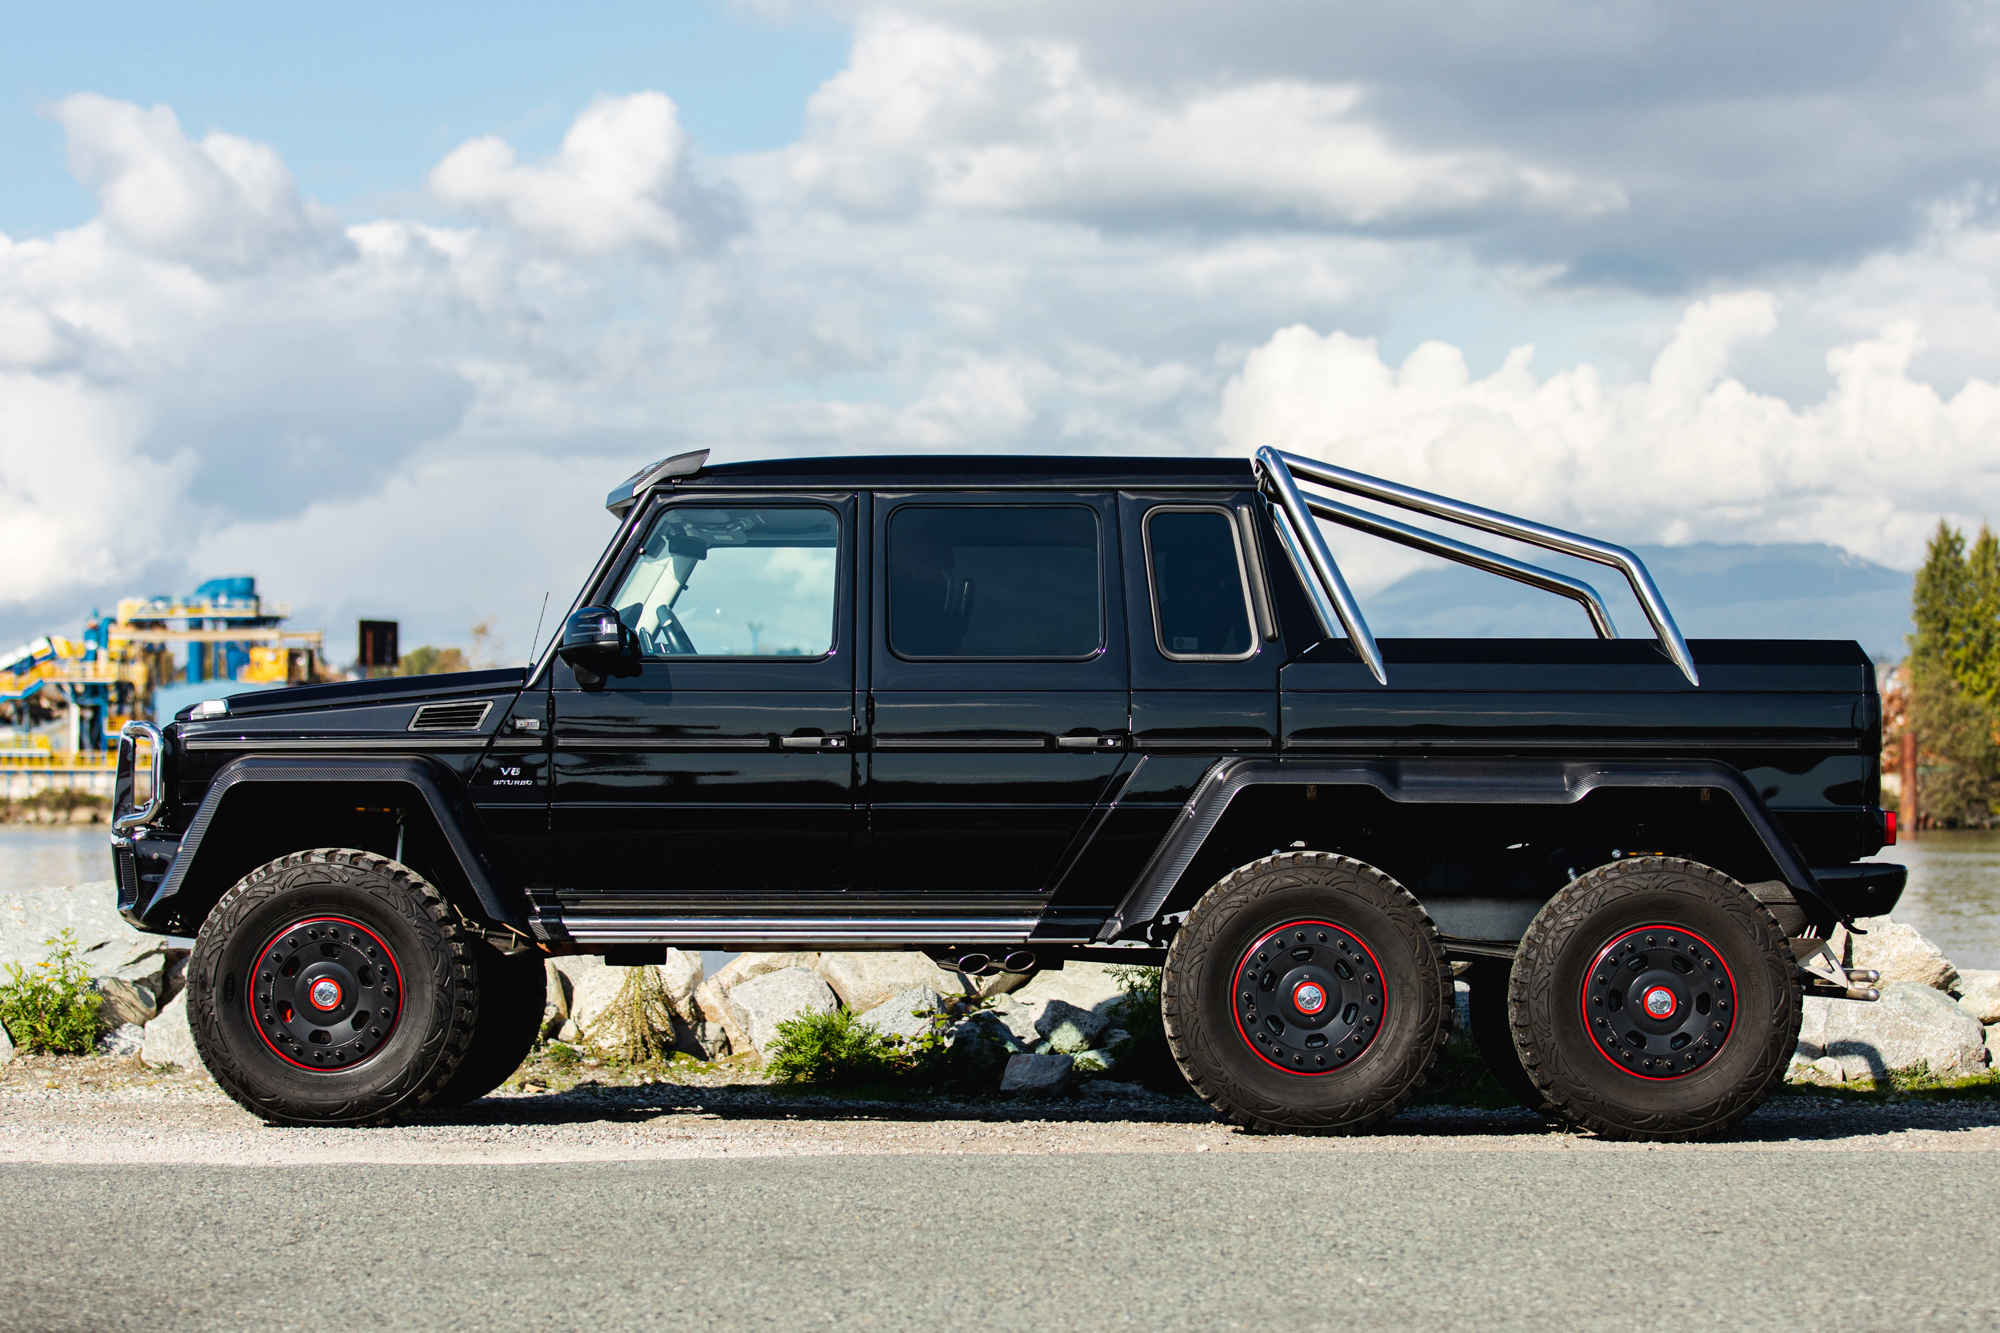 You Can Enjoy This Mercedes Benz G63 Amg 6x6 But Only For 2 5k Miles Per Year Carscoops